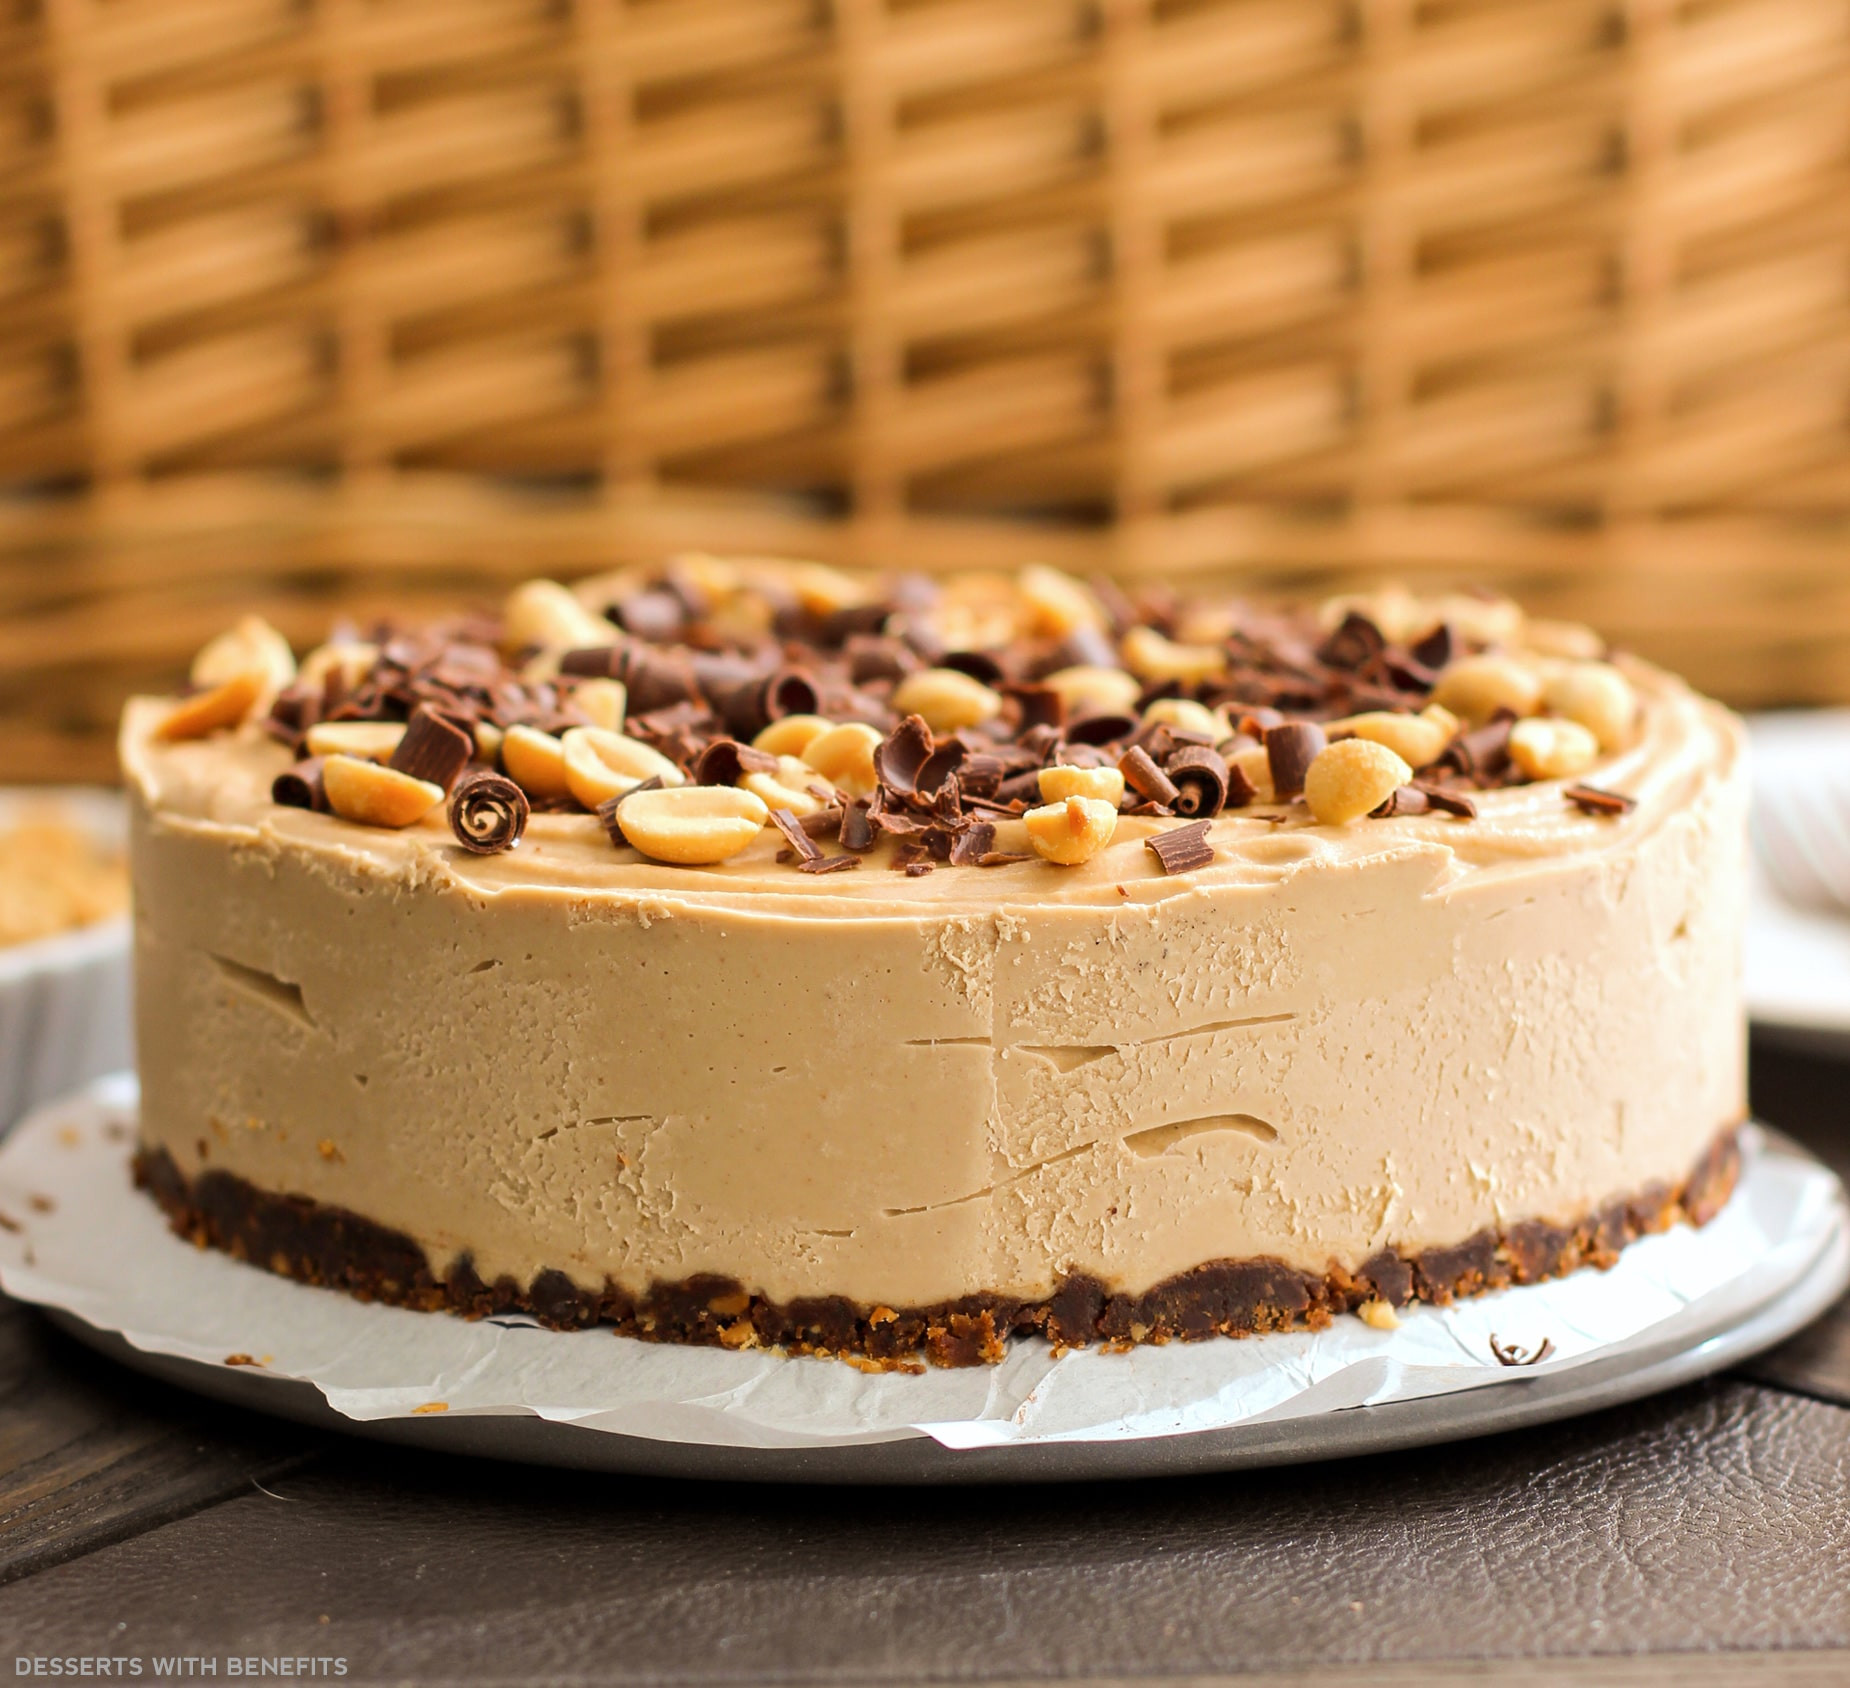 Healthy Peanut Butter Dessert Recipes
 Healthy Chocolate Peanut Butter Raw Cheesecake